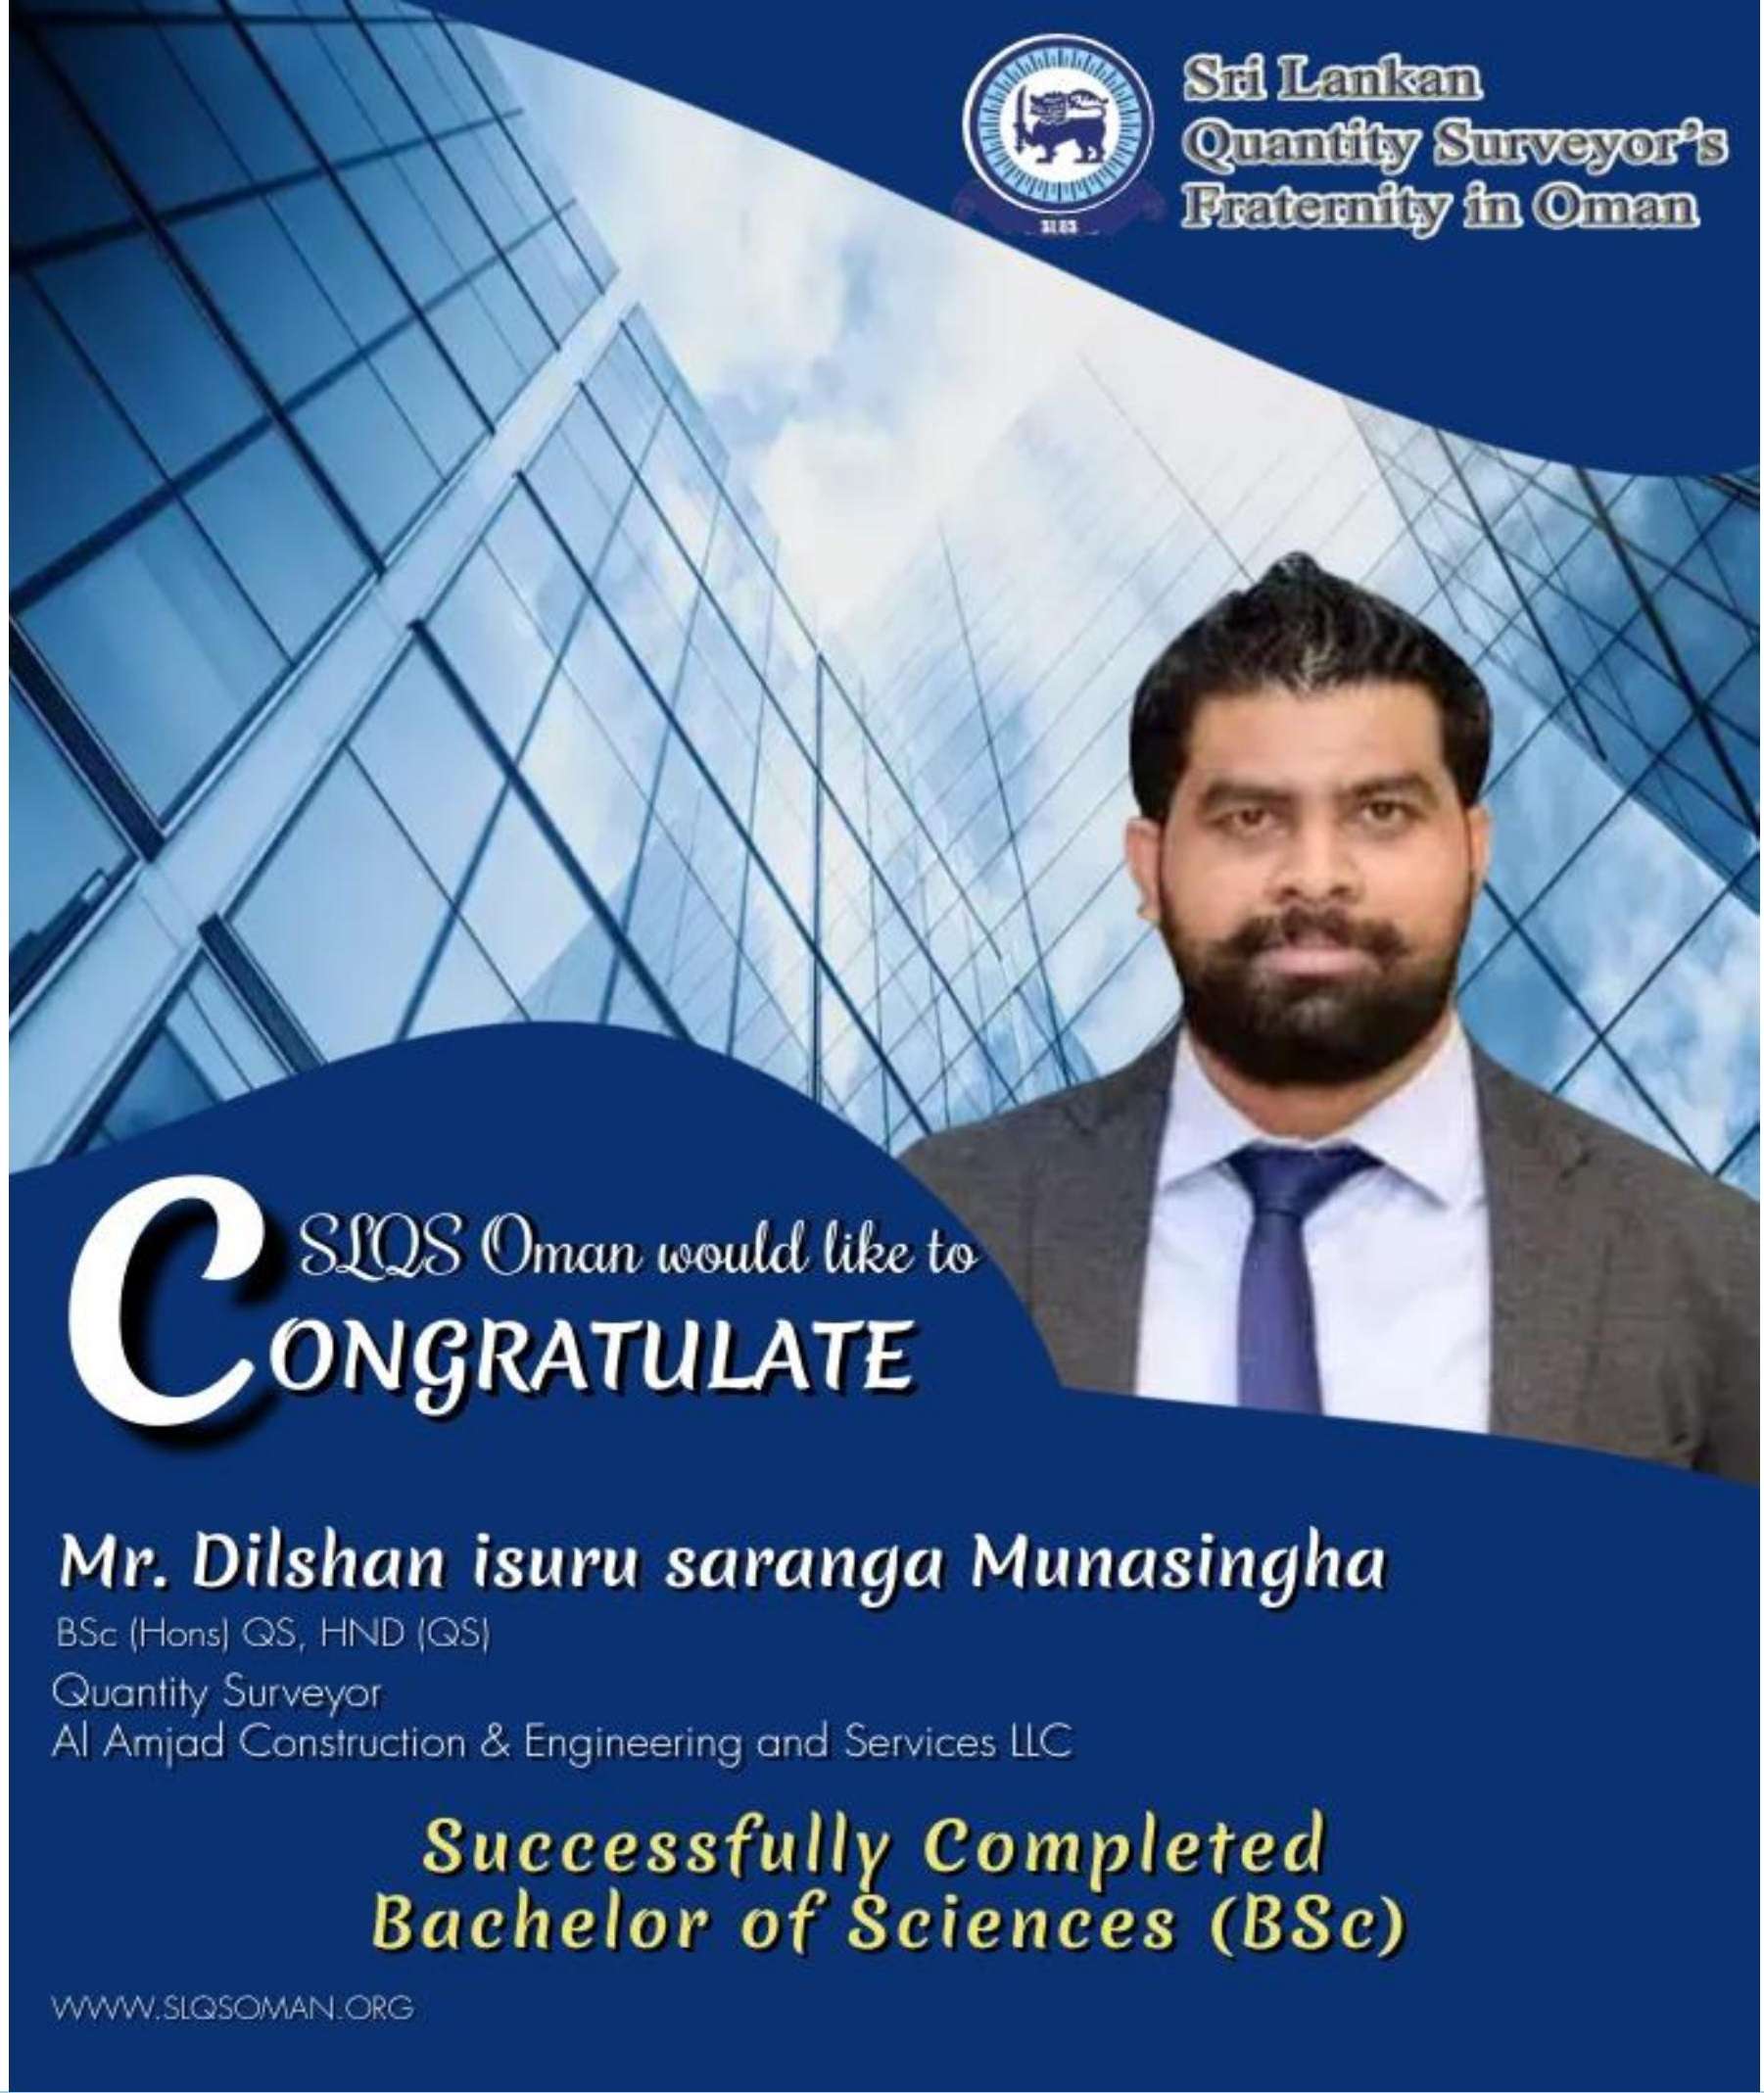 Congratulations!! Mr. Dilshan Munasingha!! For successfully completion of BSc.